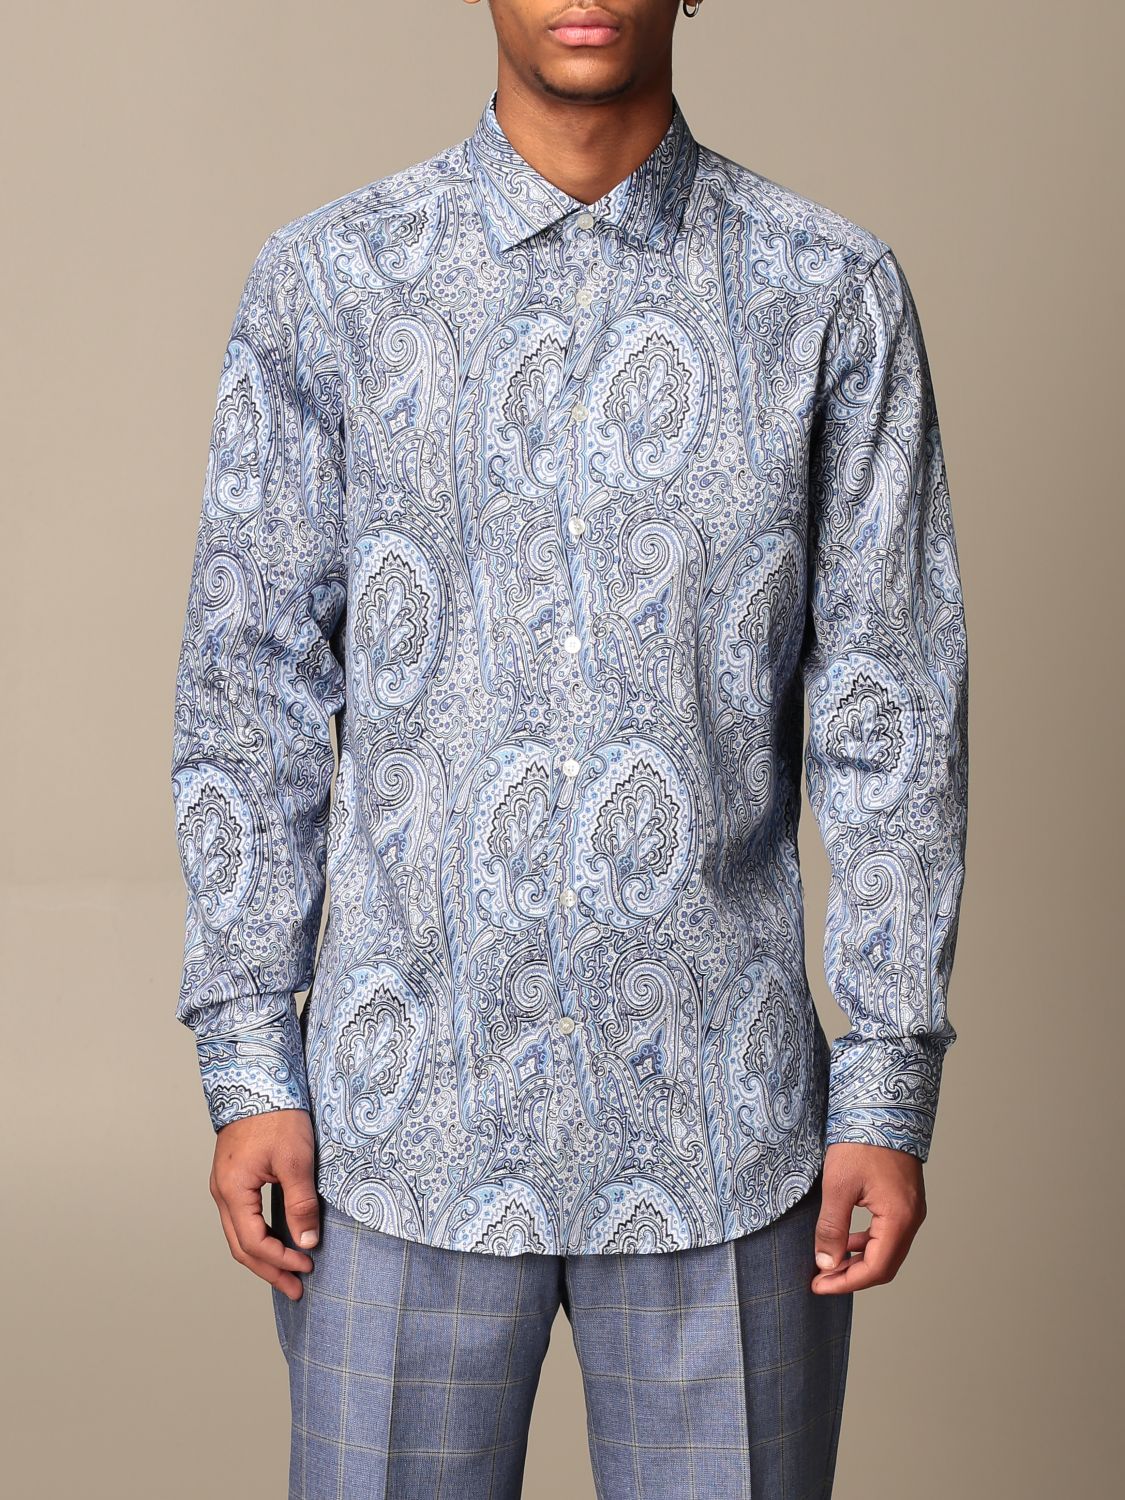 Etro classic shirt in Paisley cotton